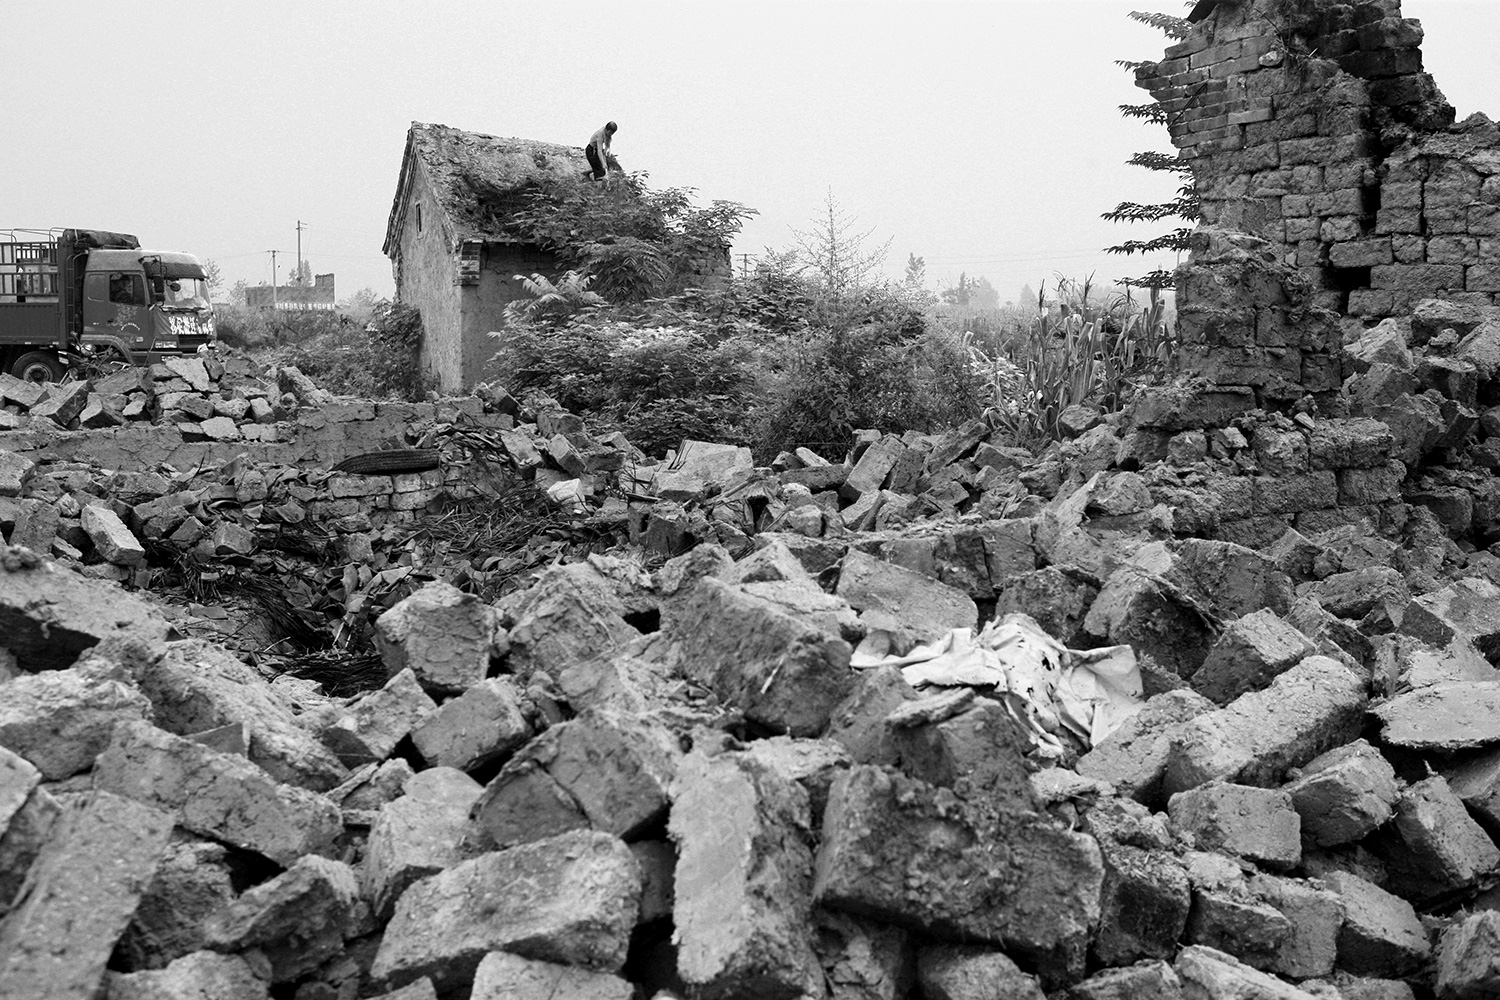 A farmer demolishes his own house in Jinhe. Roof tiles that could be salvaged were loaded onto a truck and taken away.